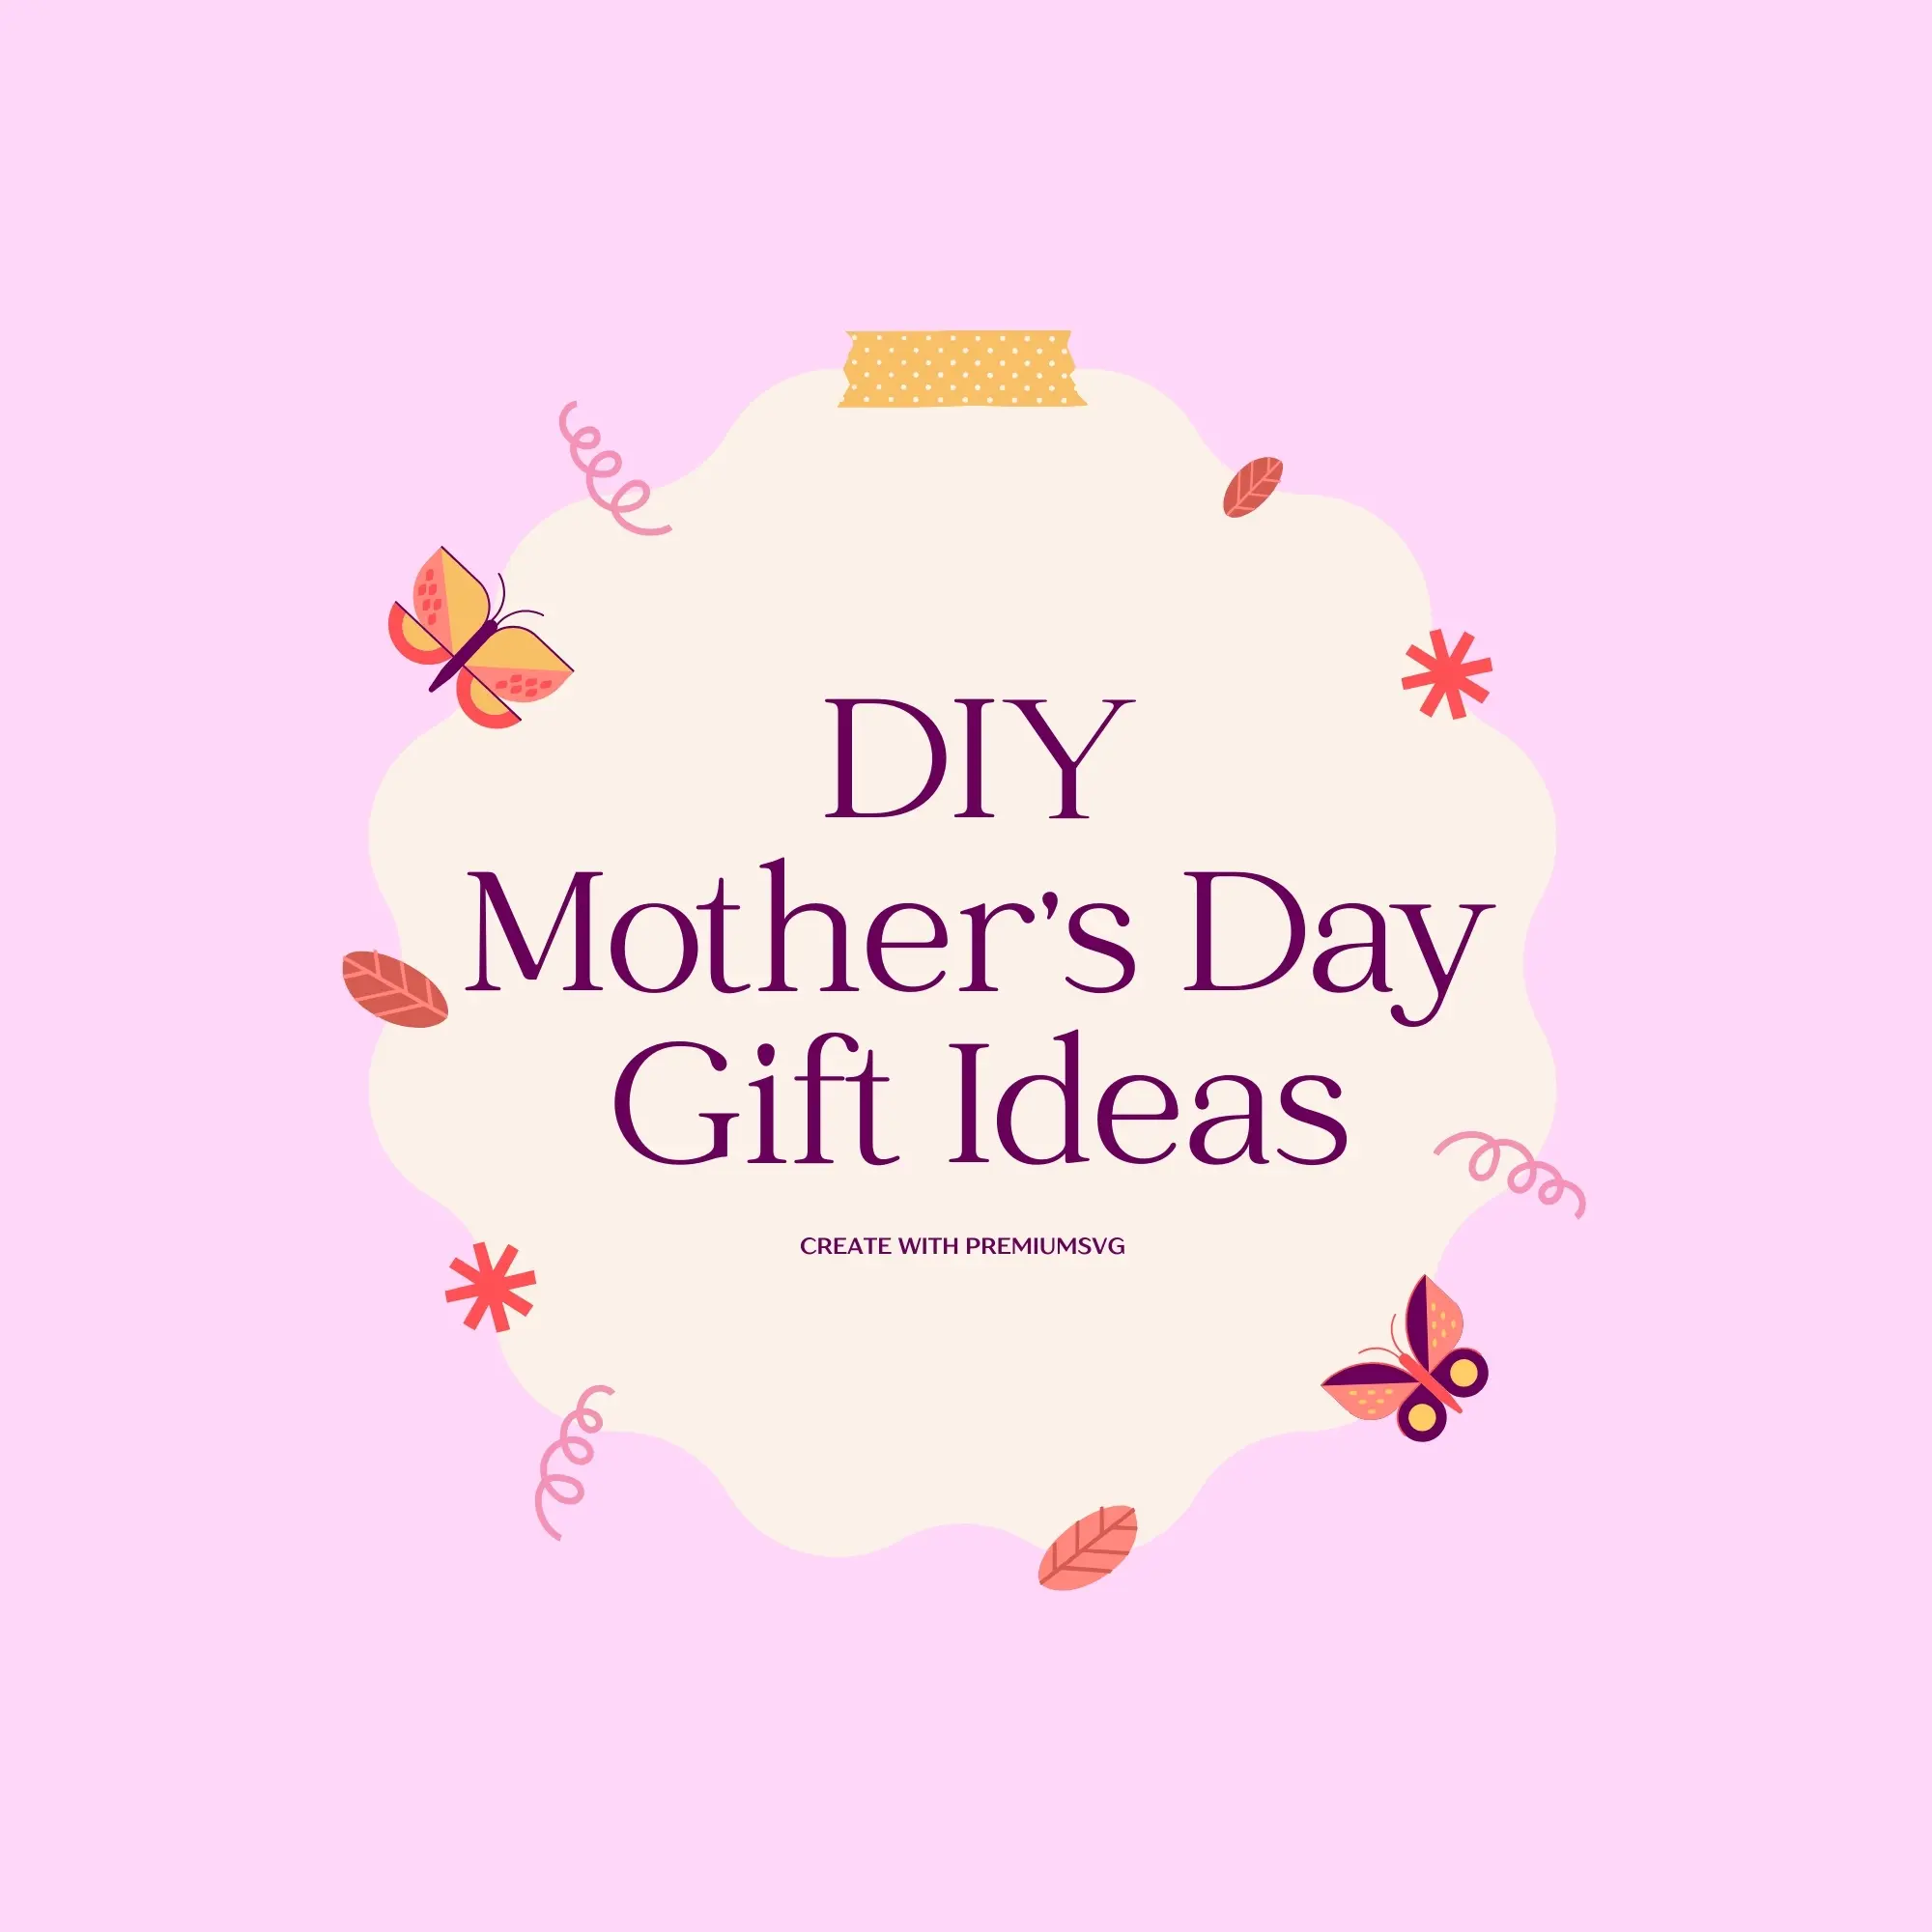 Diy Mother's Day Gift Ideas